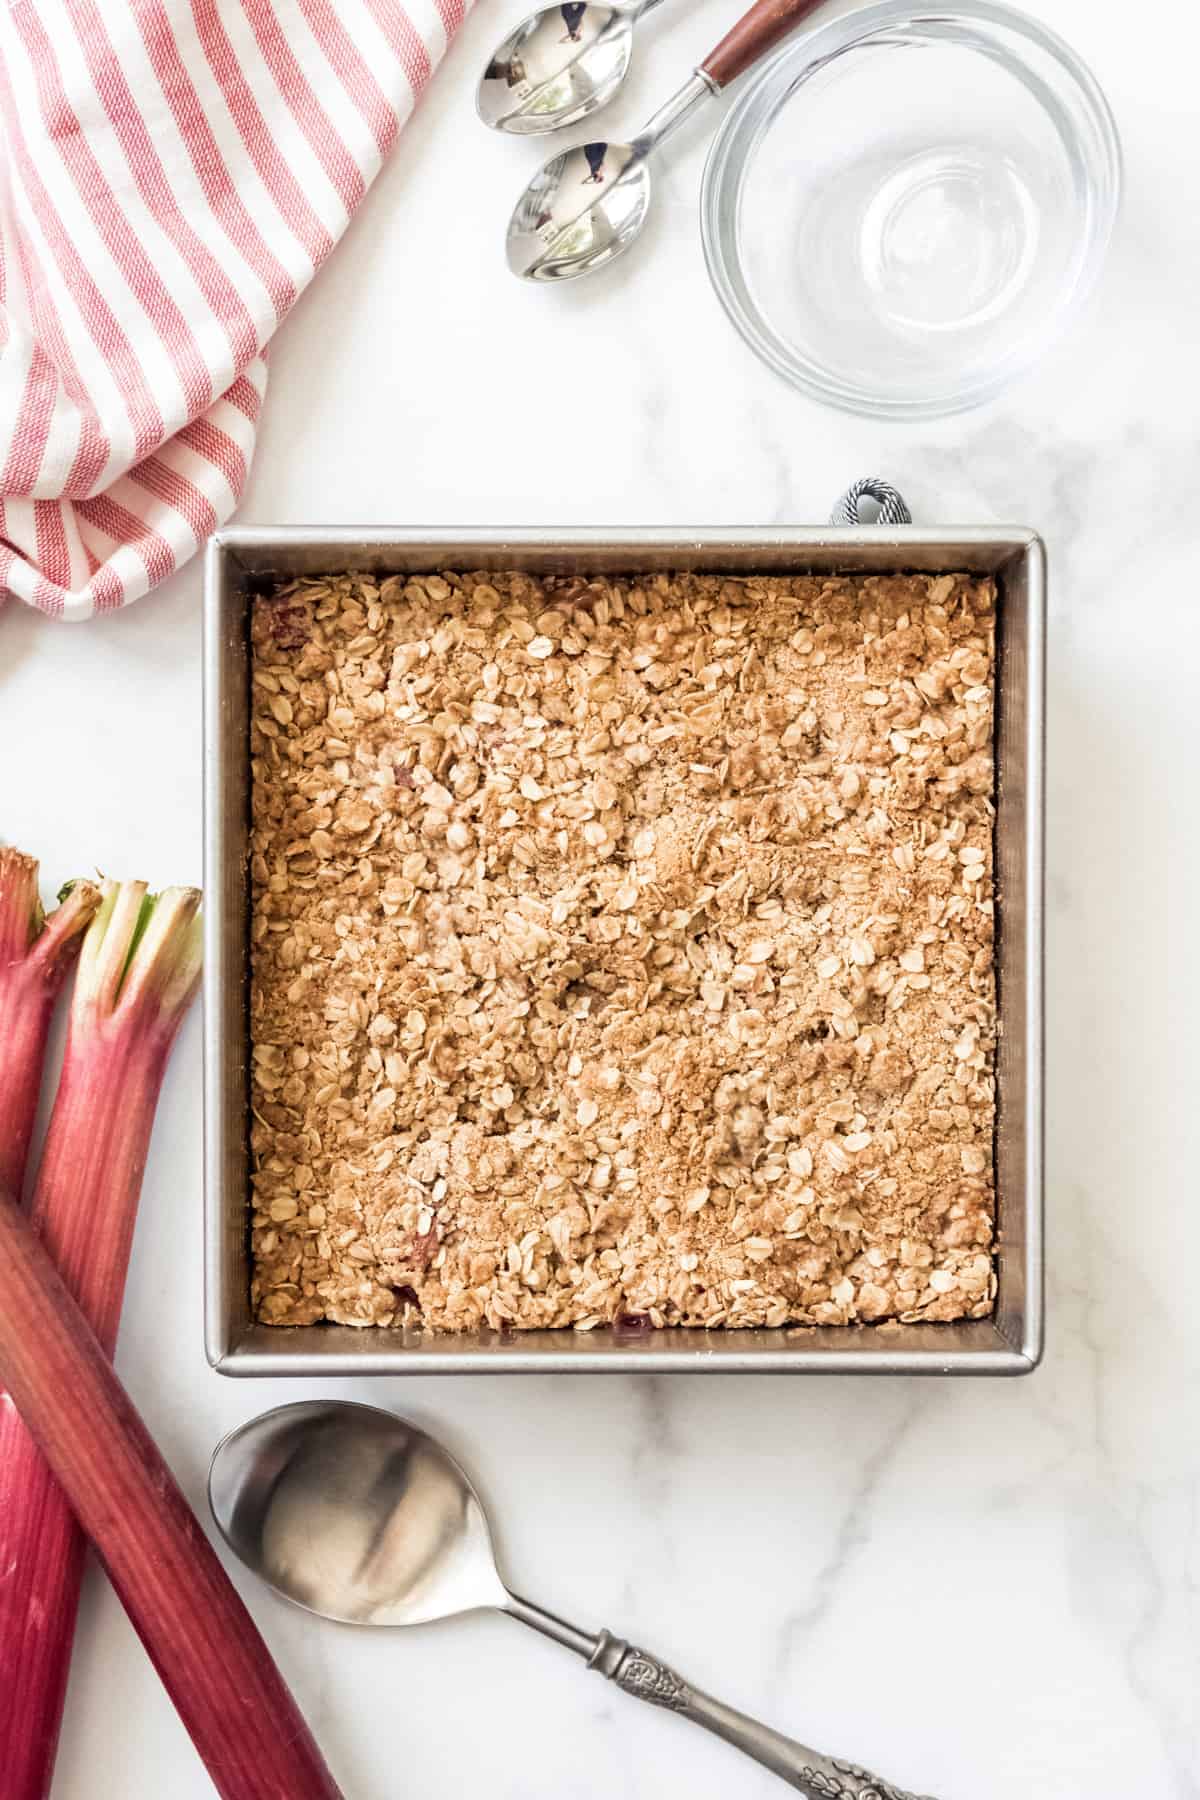 A square baking dish filled with oat crisp topping next to stalks of fresh rhubarb.